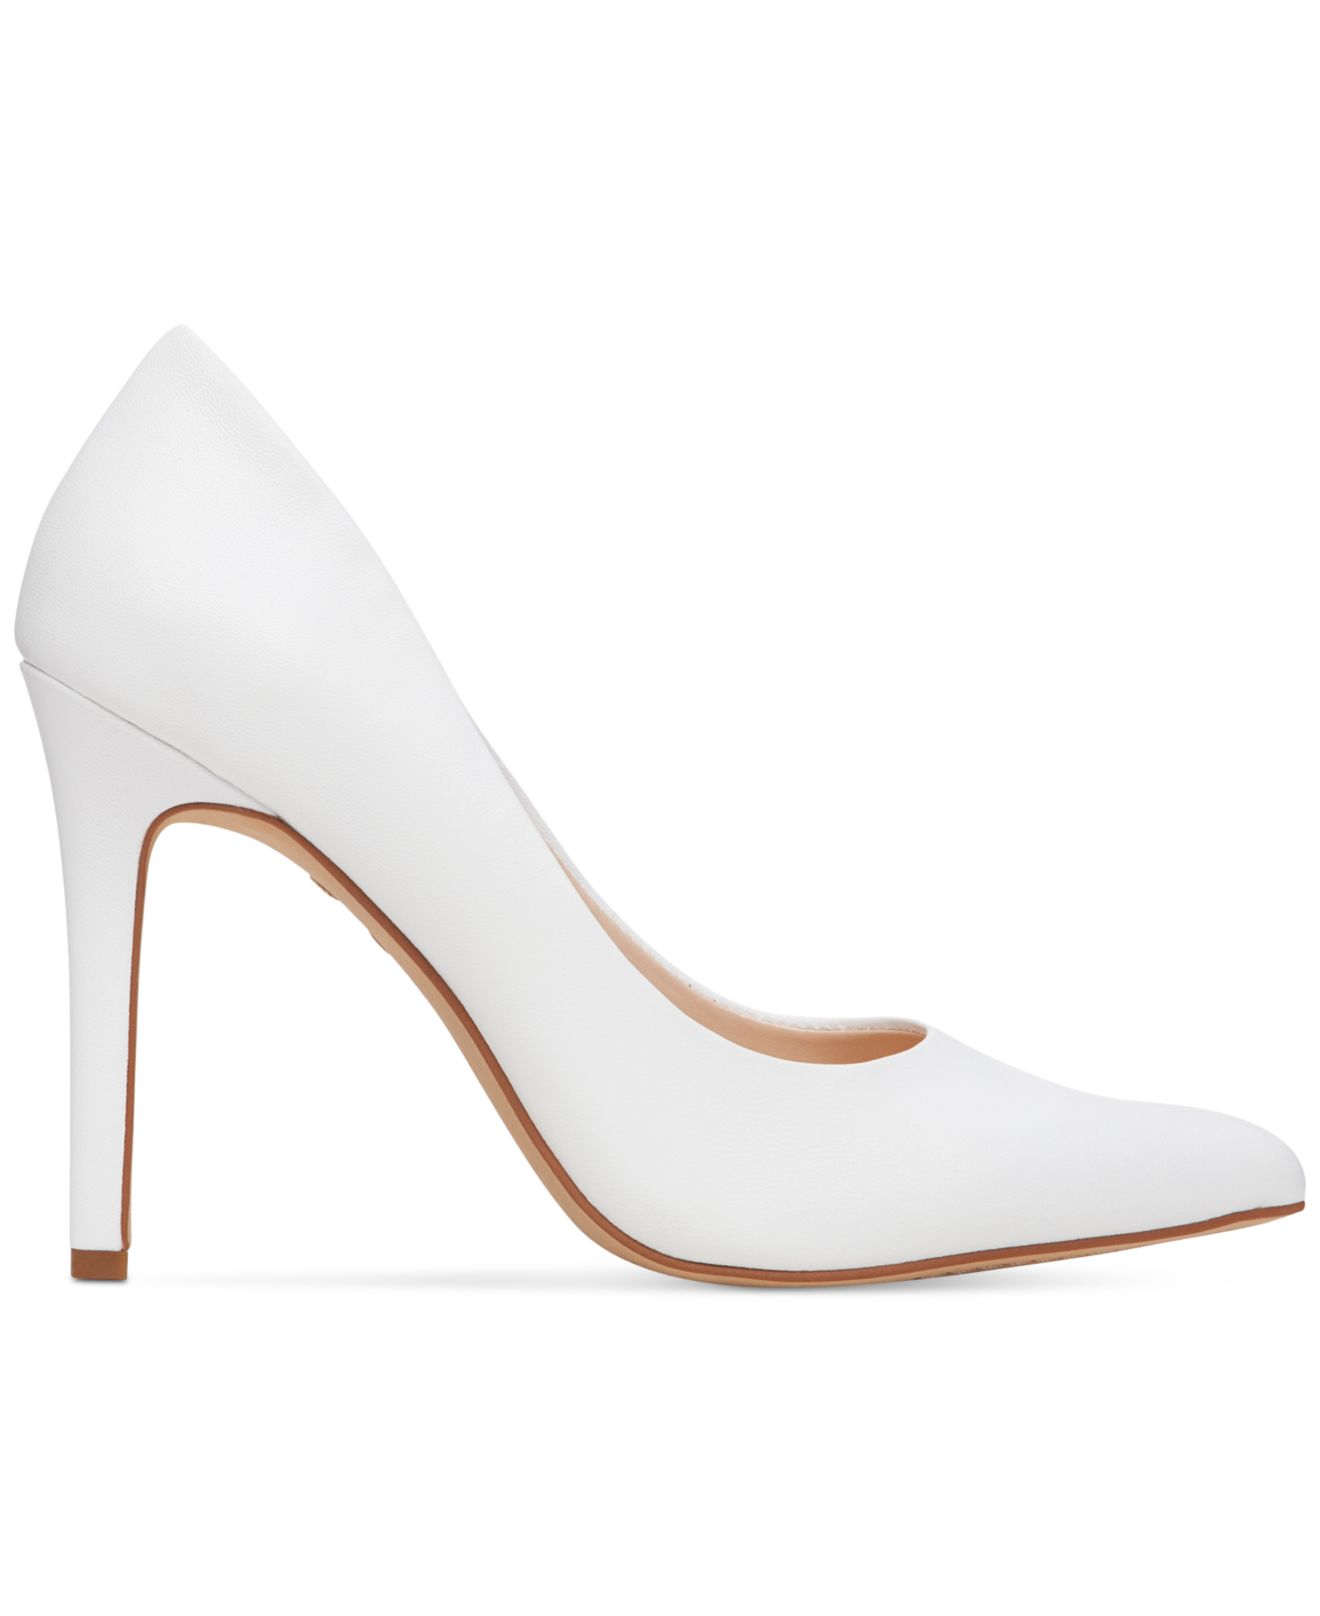 Lyst - Vince camuto Kain Pointed Toe Mid Heel Pumps in White